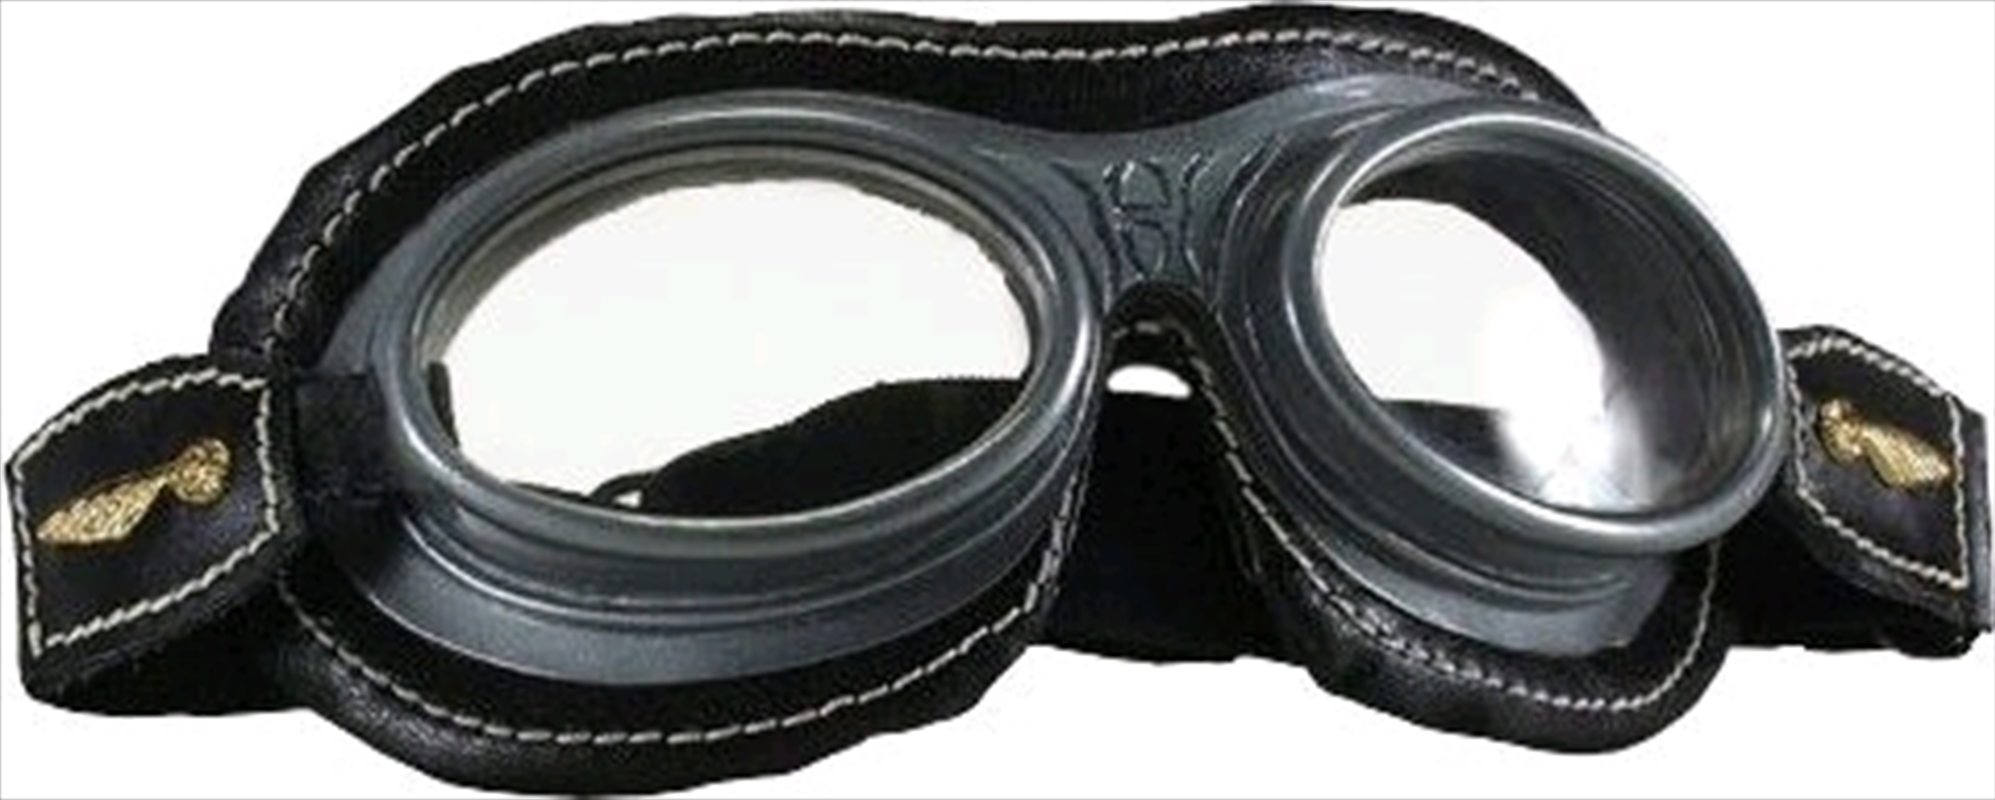 Harry Potter - Quidditch Goggles | Apparel